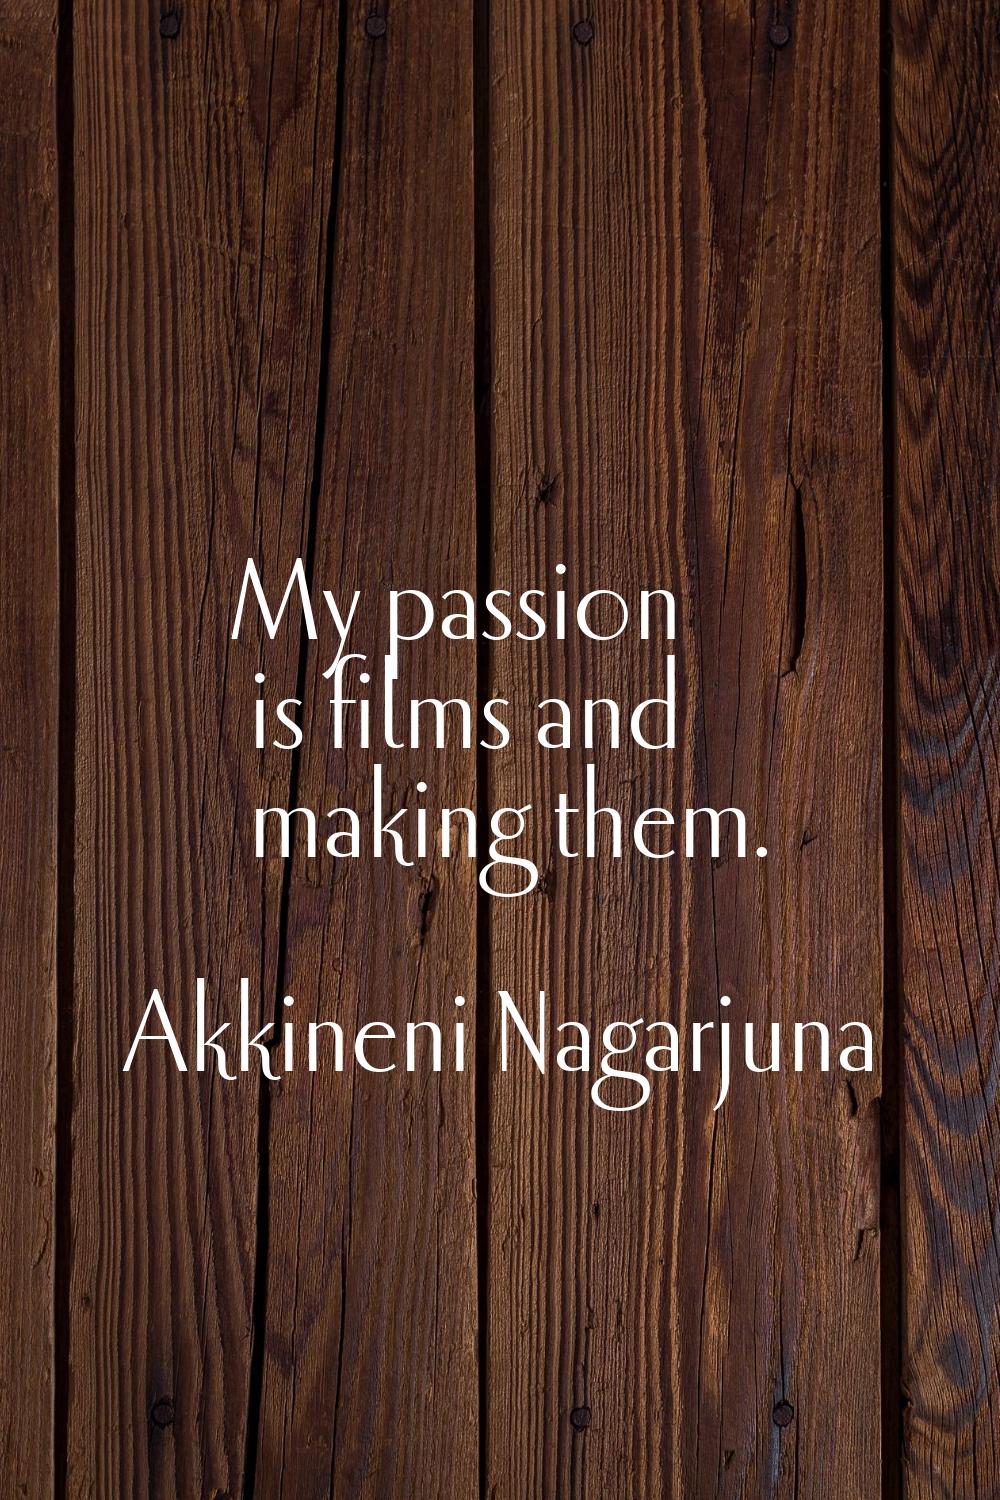 My passion is films and making them.